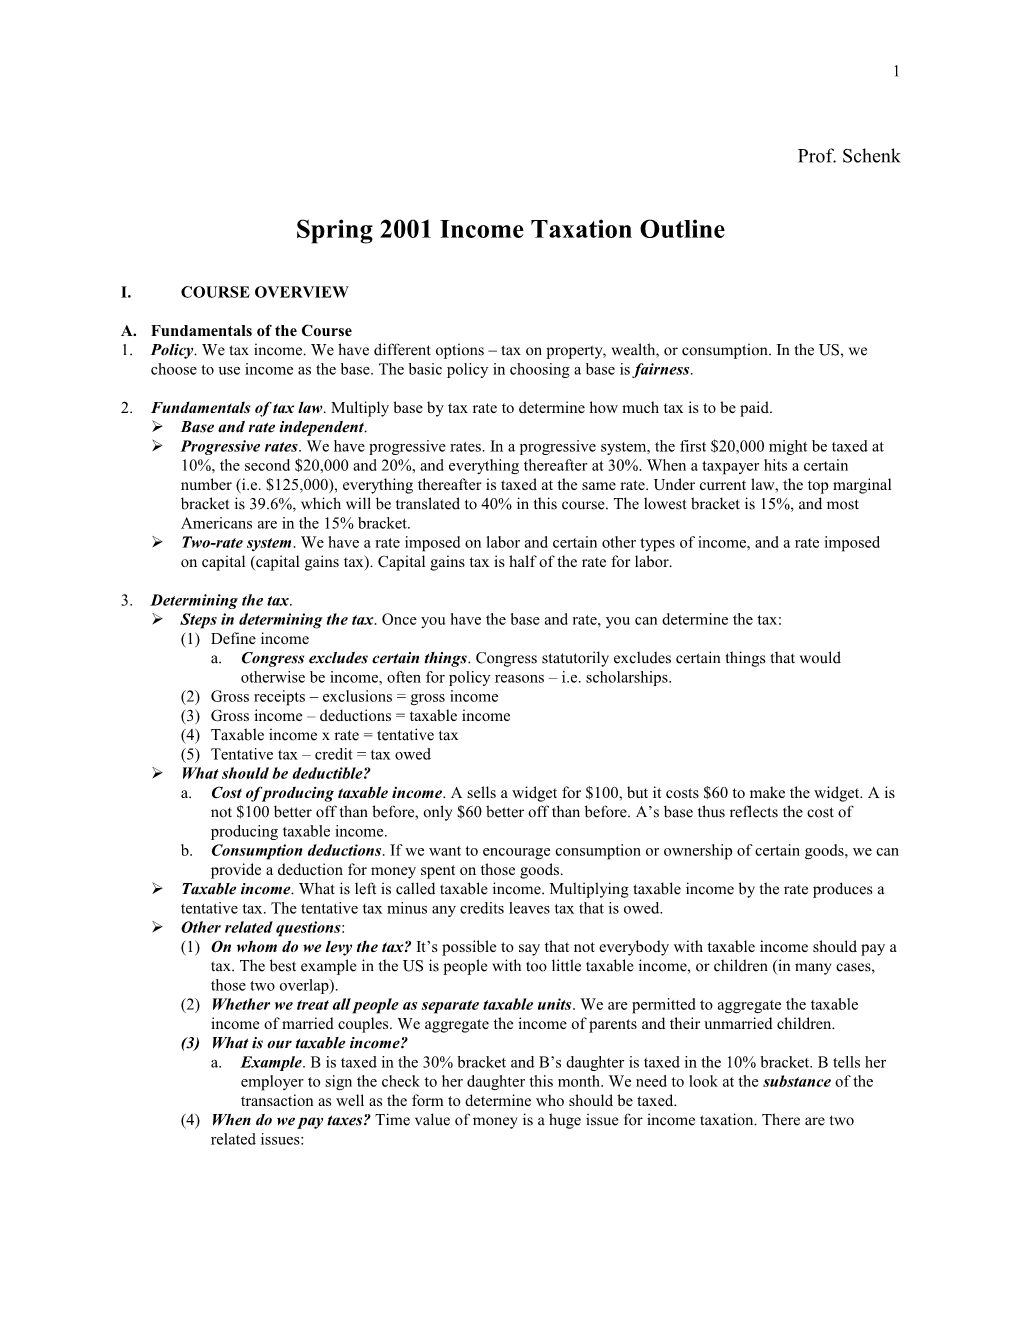 Spring 2001 Income Taxation Outline